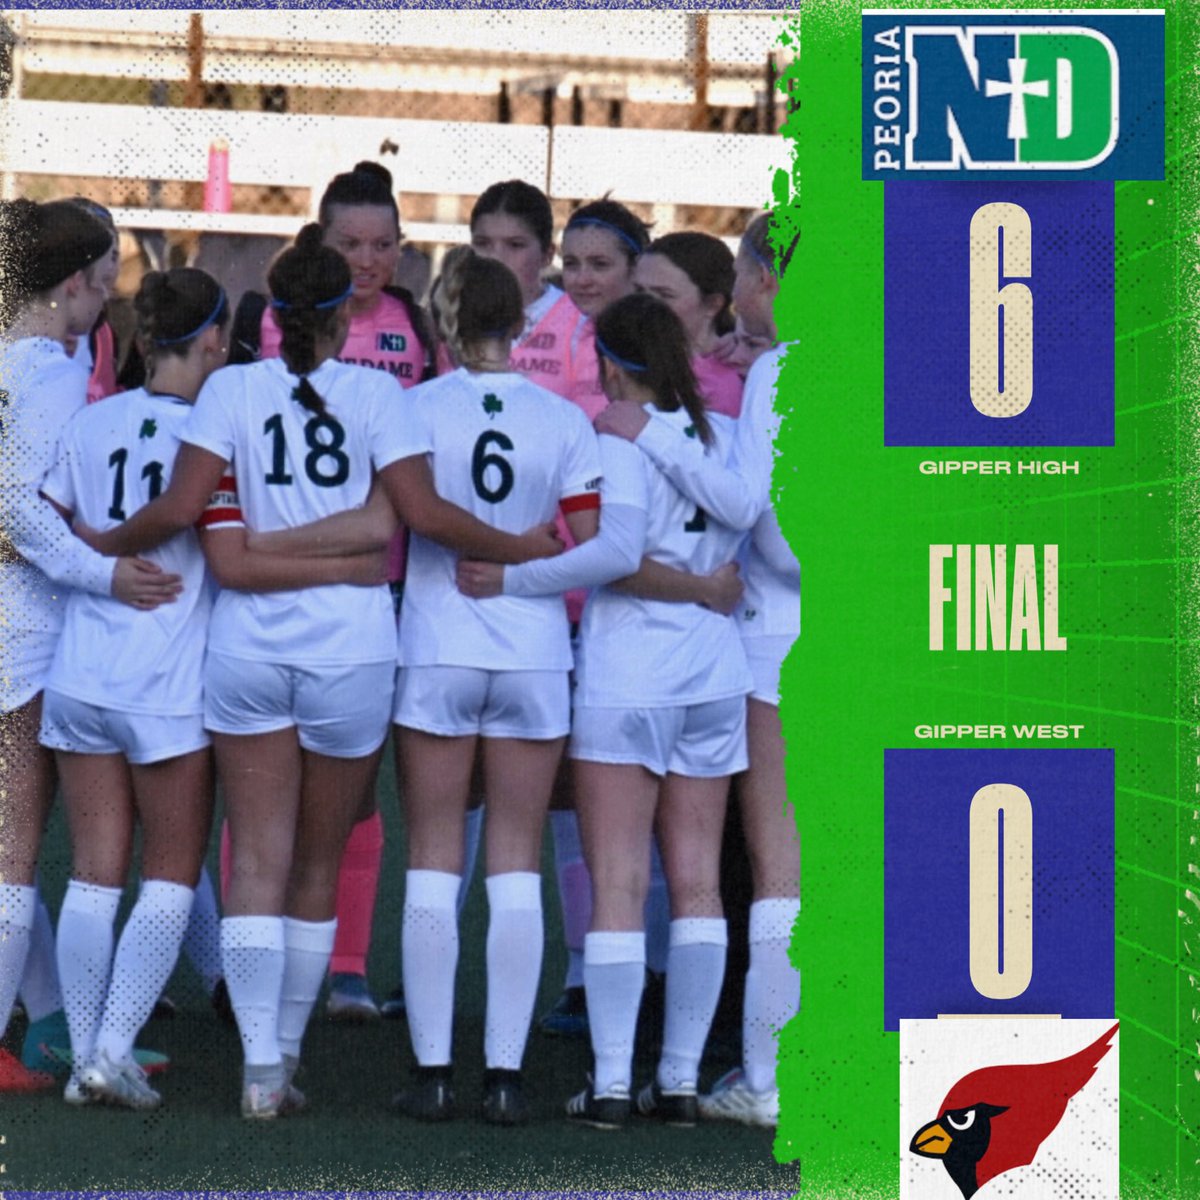 IRISH WIN!!! Girls came ready to play and finished their chances! Nice win in the home opener over metamora! Back at it tomorrow and continue to get better! ☘️⚽️ #PNDsoccer